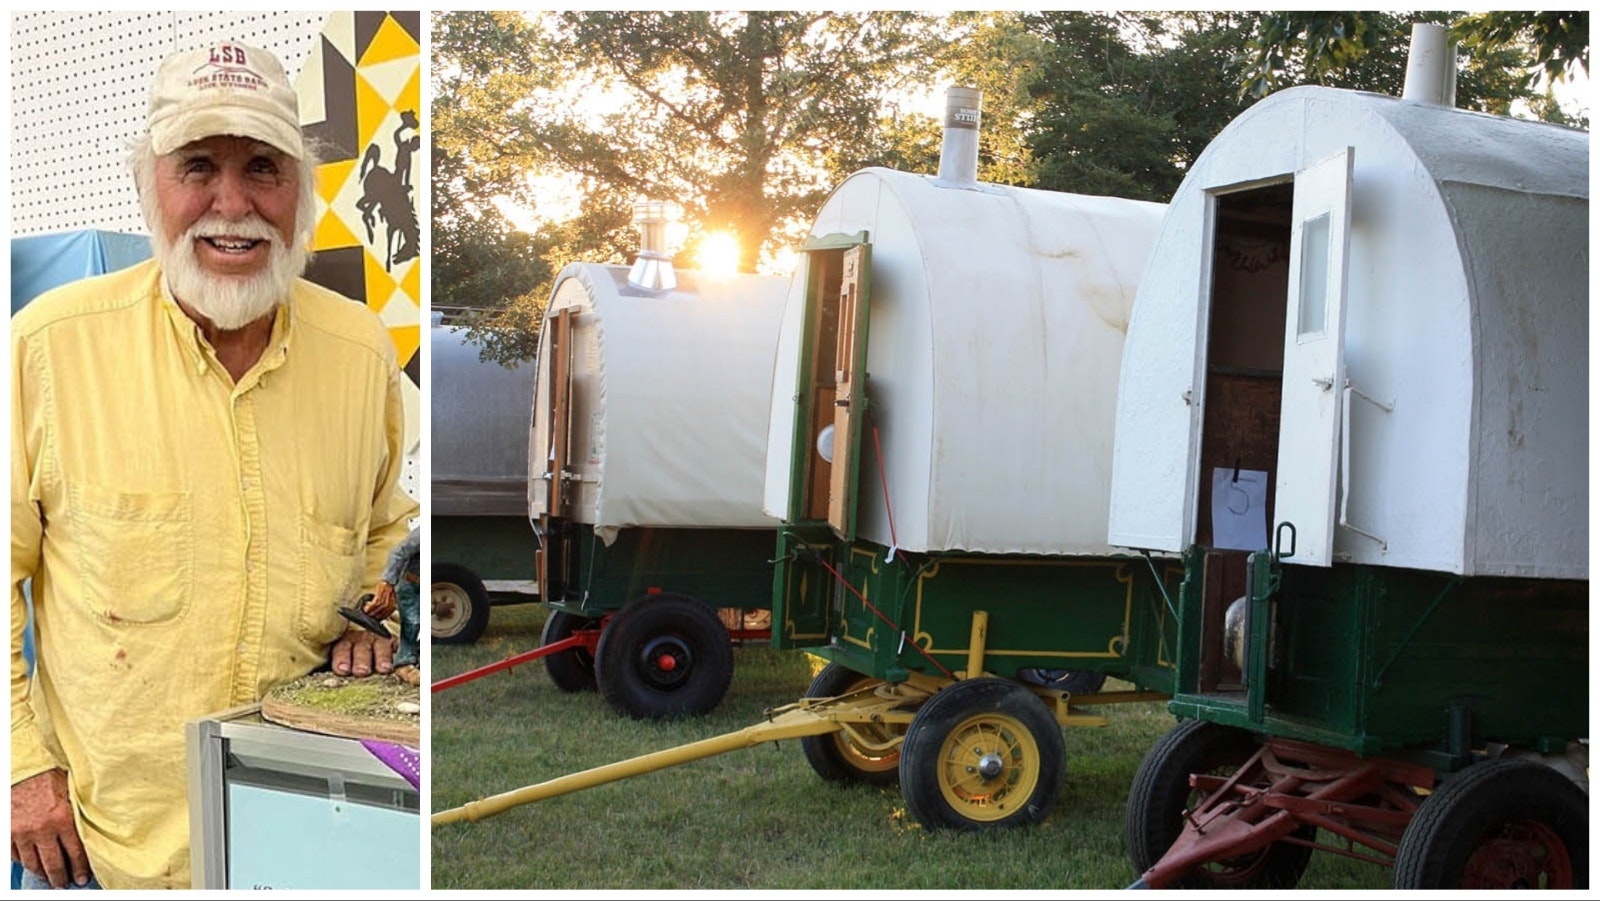 Steve "Shakey" Chadwick has been restoring and researching sheep wagons for more than 50 years.